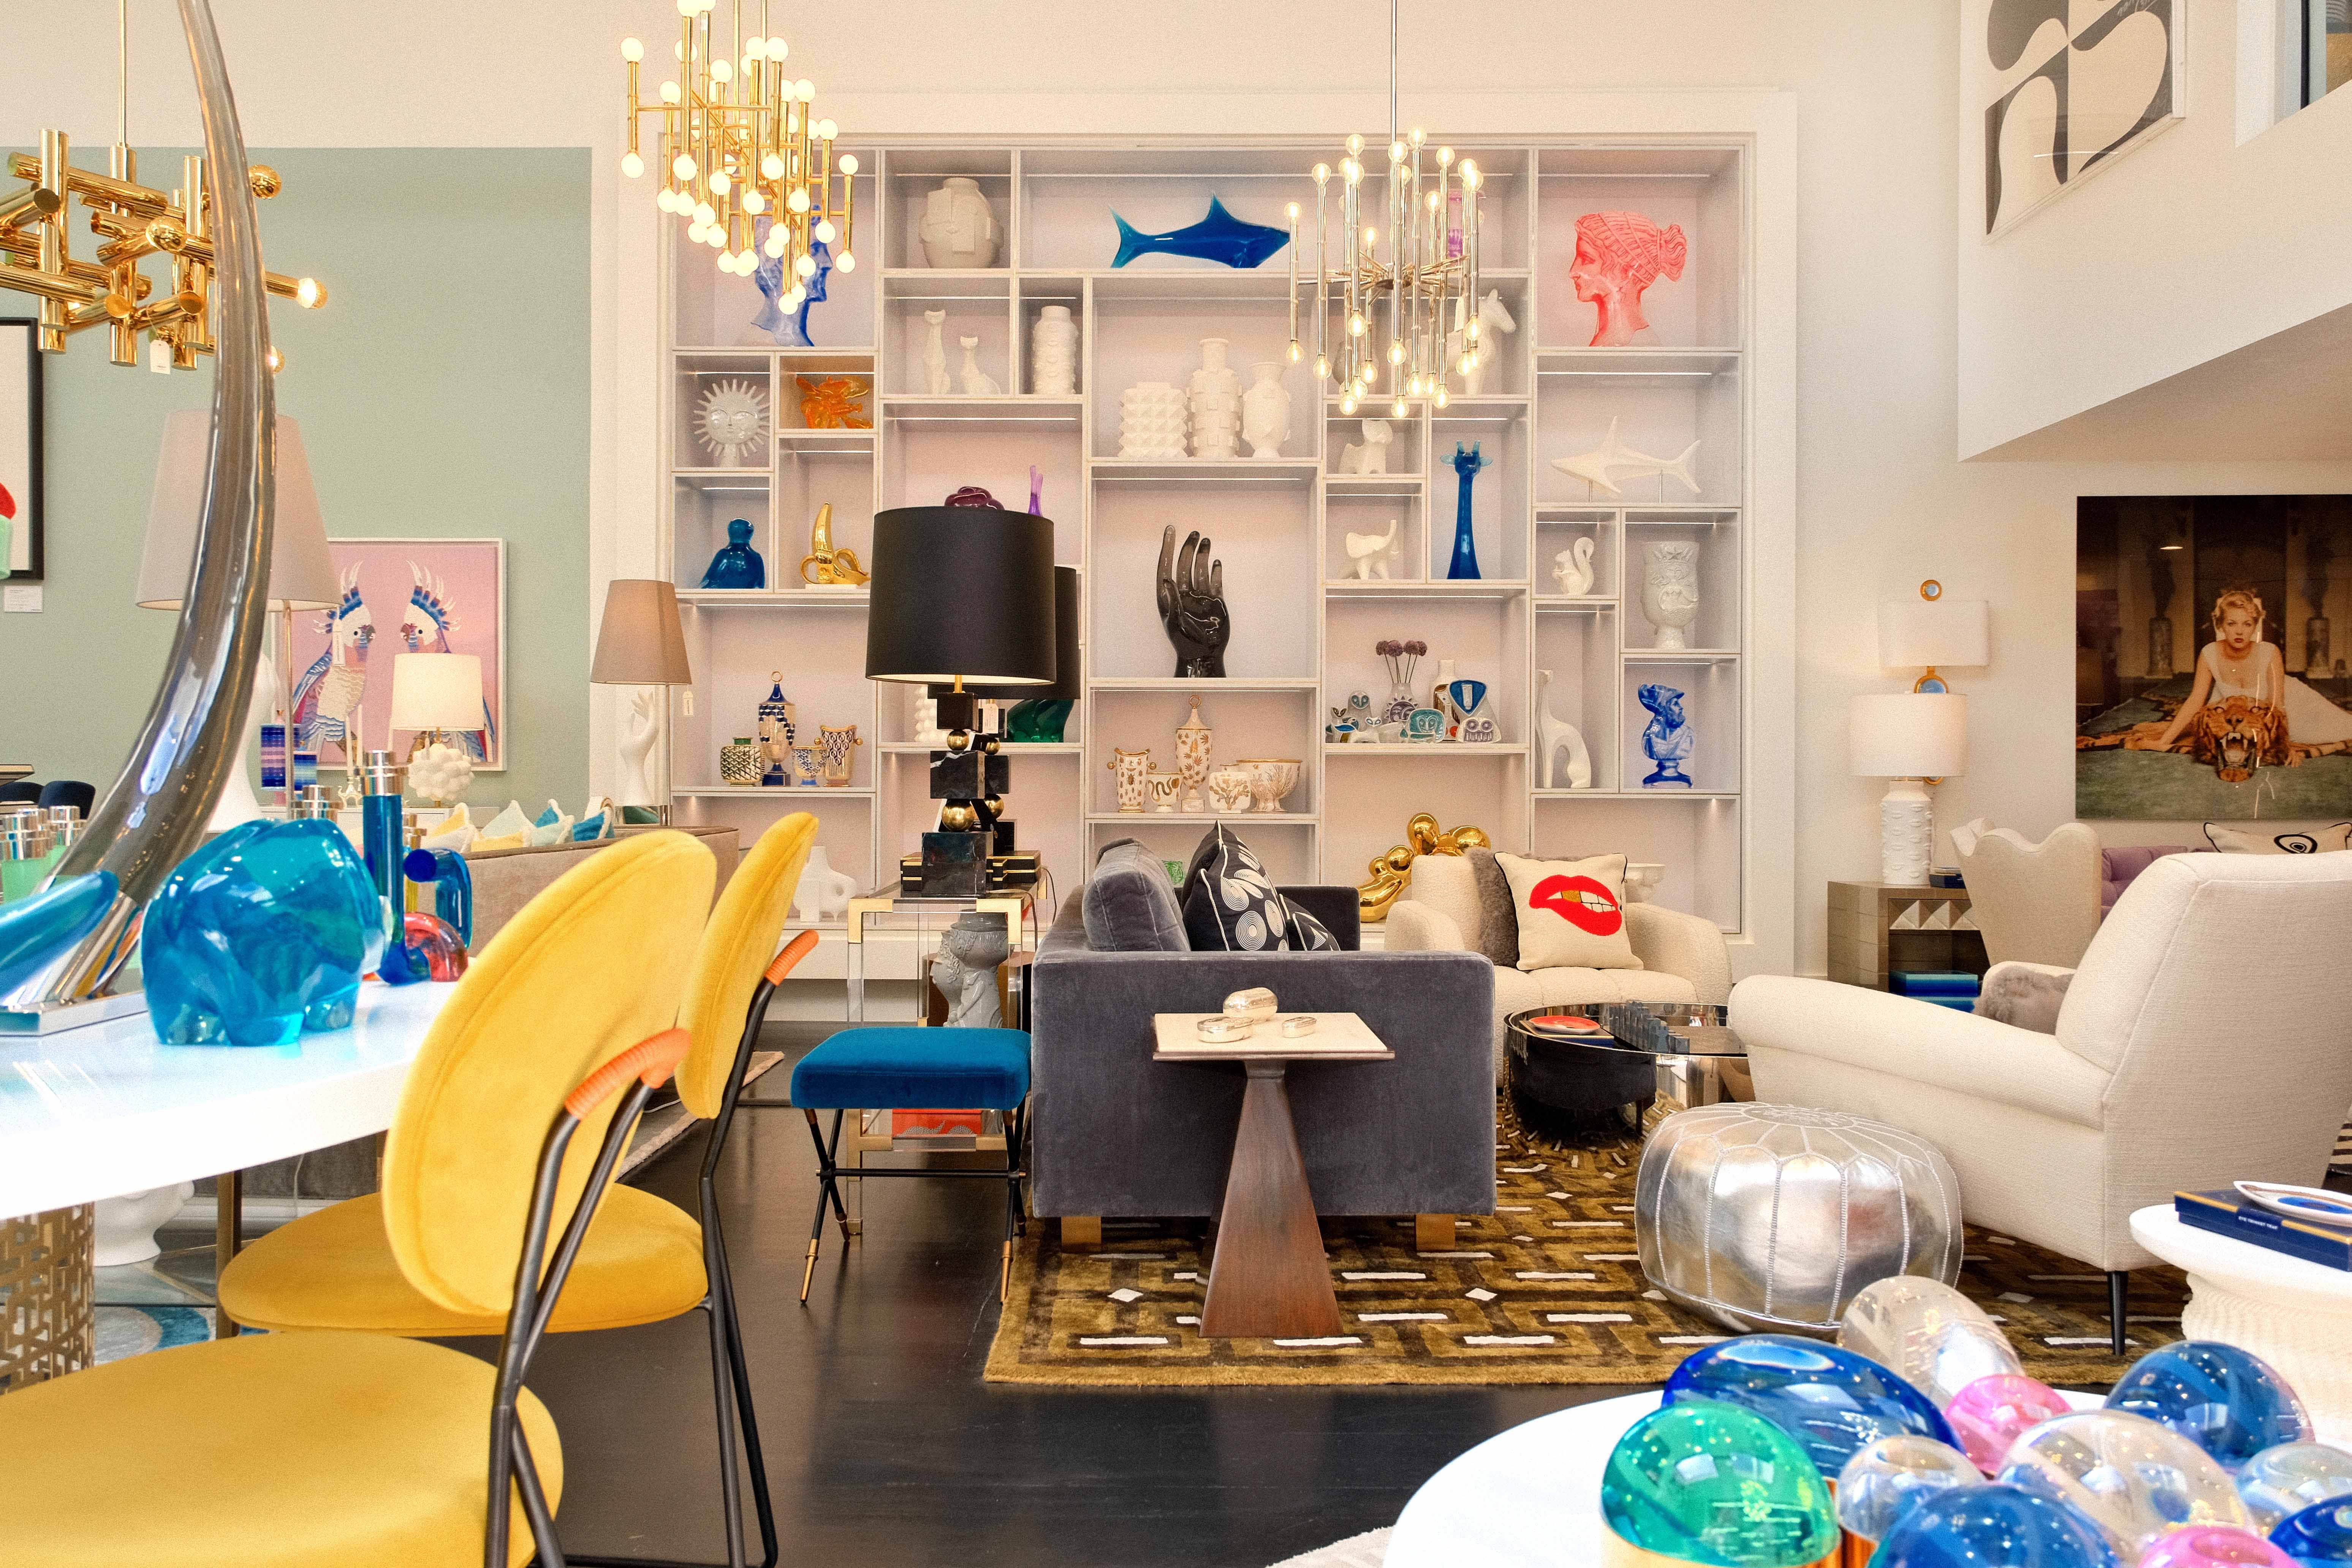 See How the Magic Is Made at Jonathan Adler’s New SoHo Headquarters